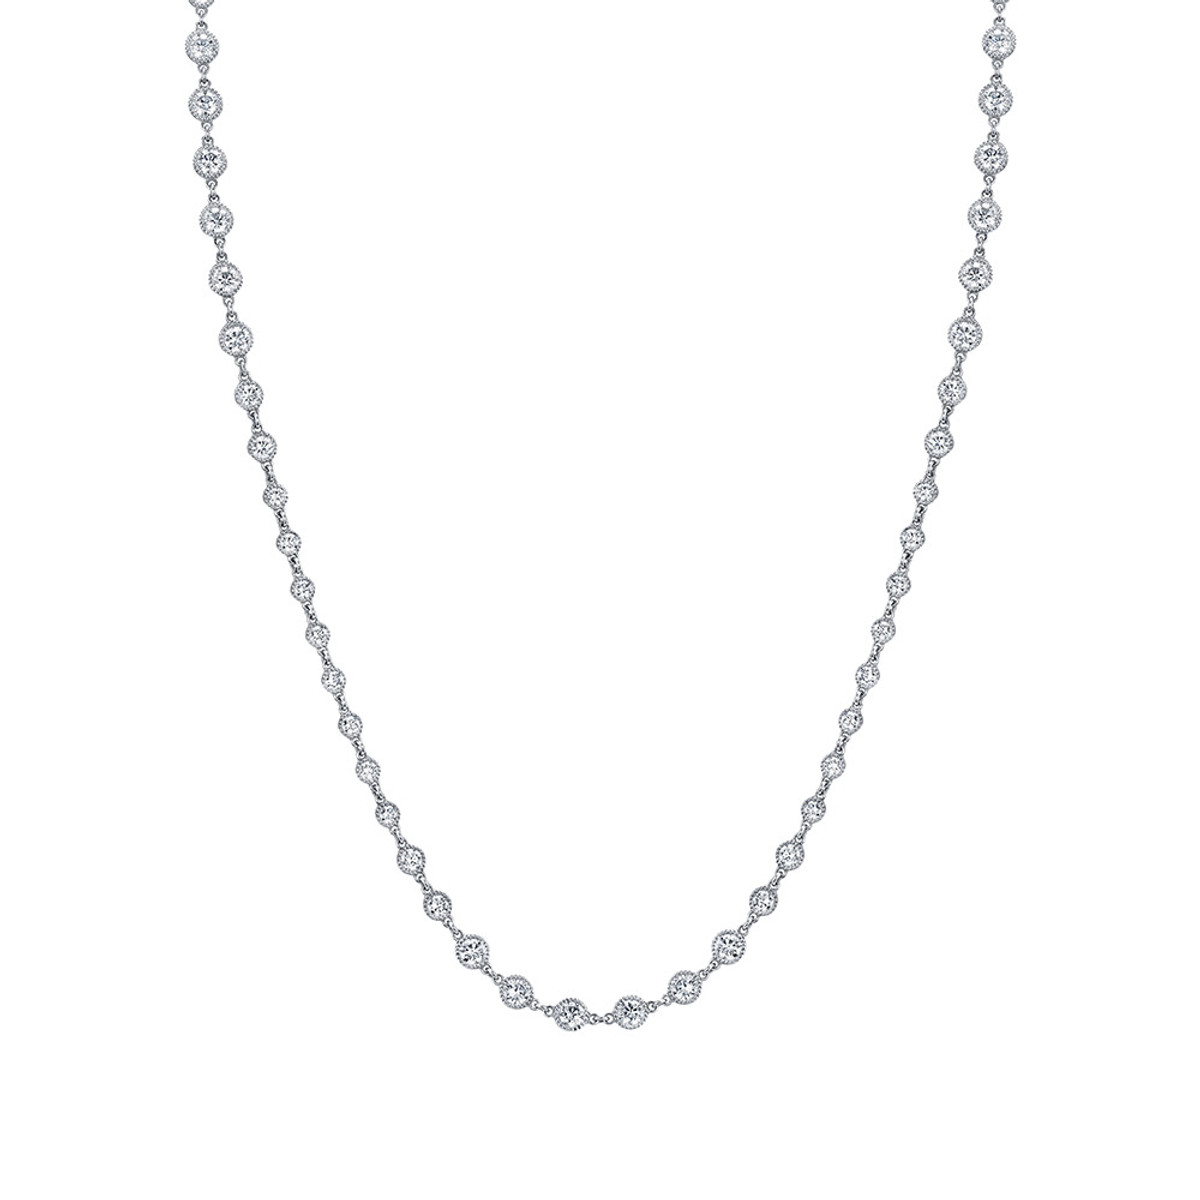 Hyde Park Collection Platinum Diamond Station Necklace-59718 Product Image